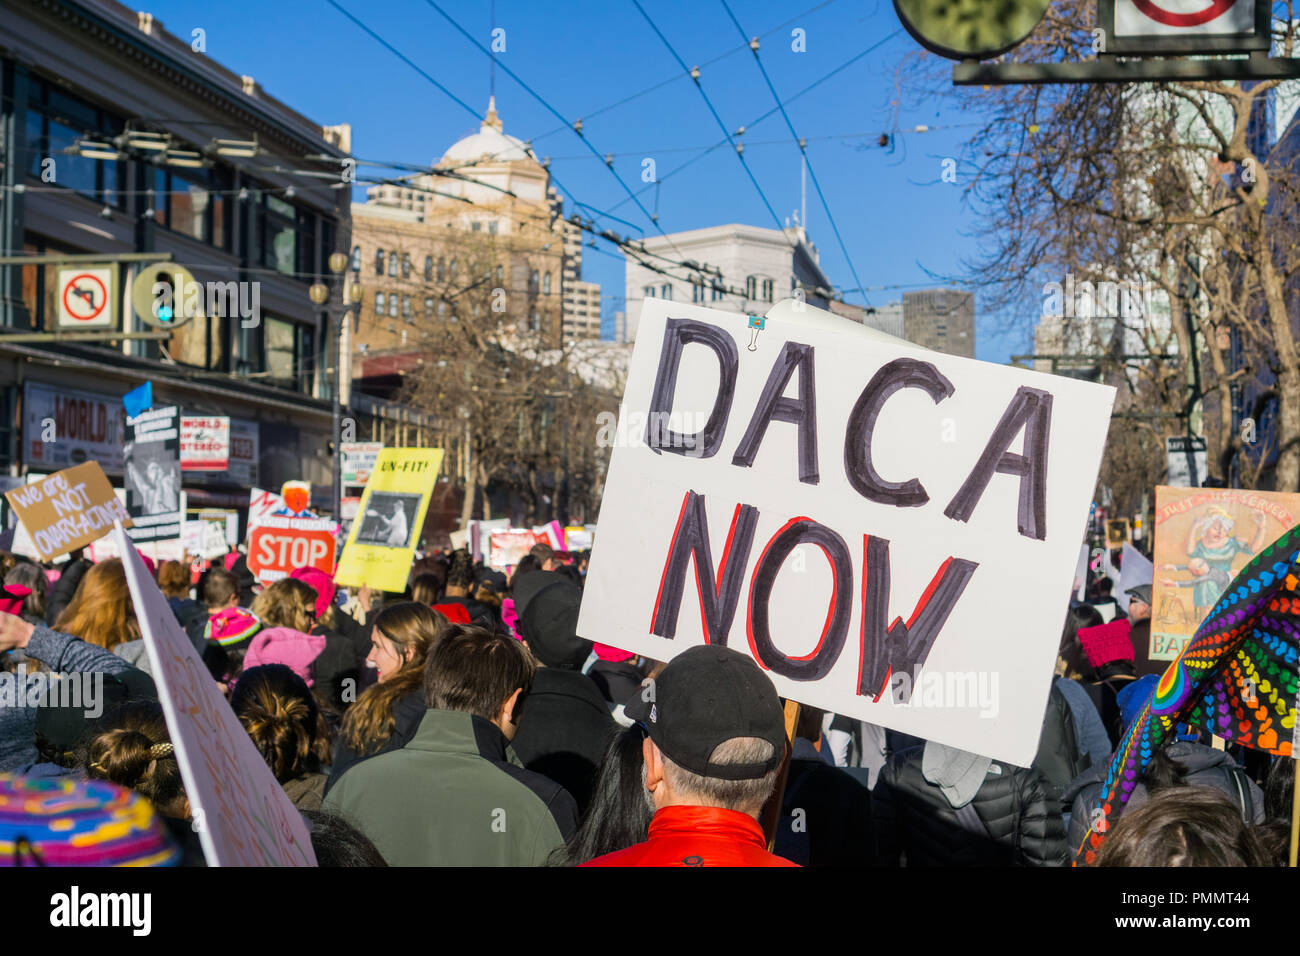 January 20, 2018 San Francisco / CA / USA - 'Daca now' sign carried by a participant at the Women's March Stock Photo